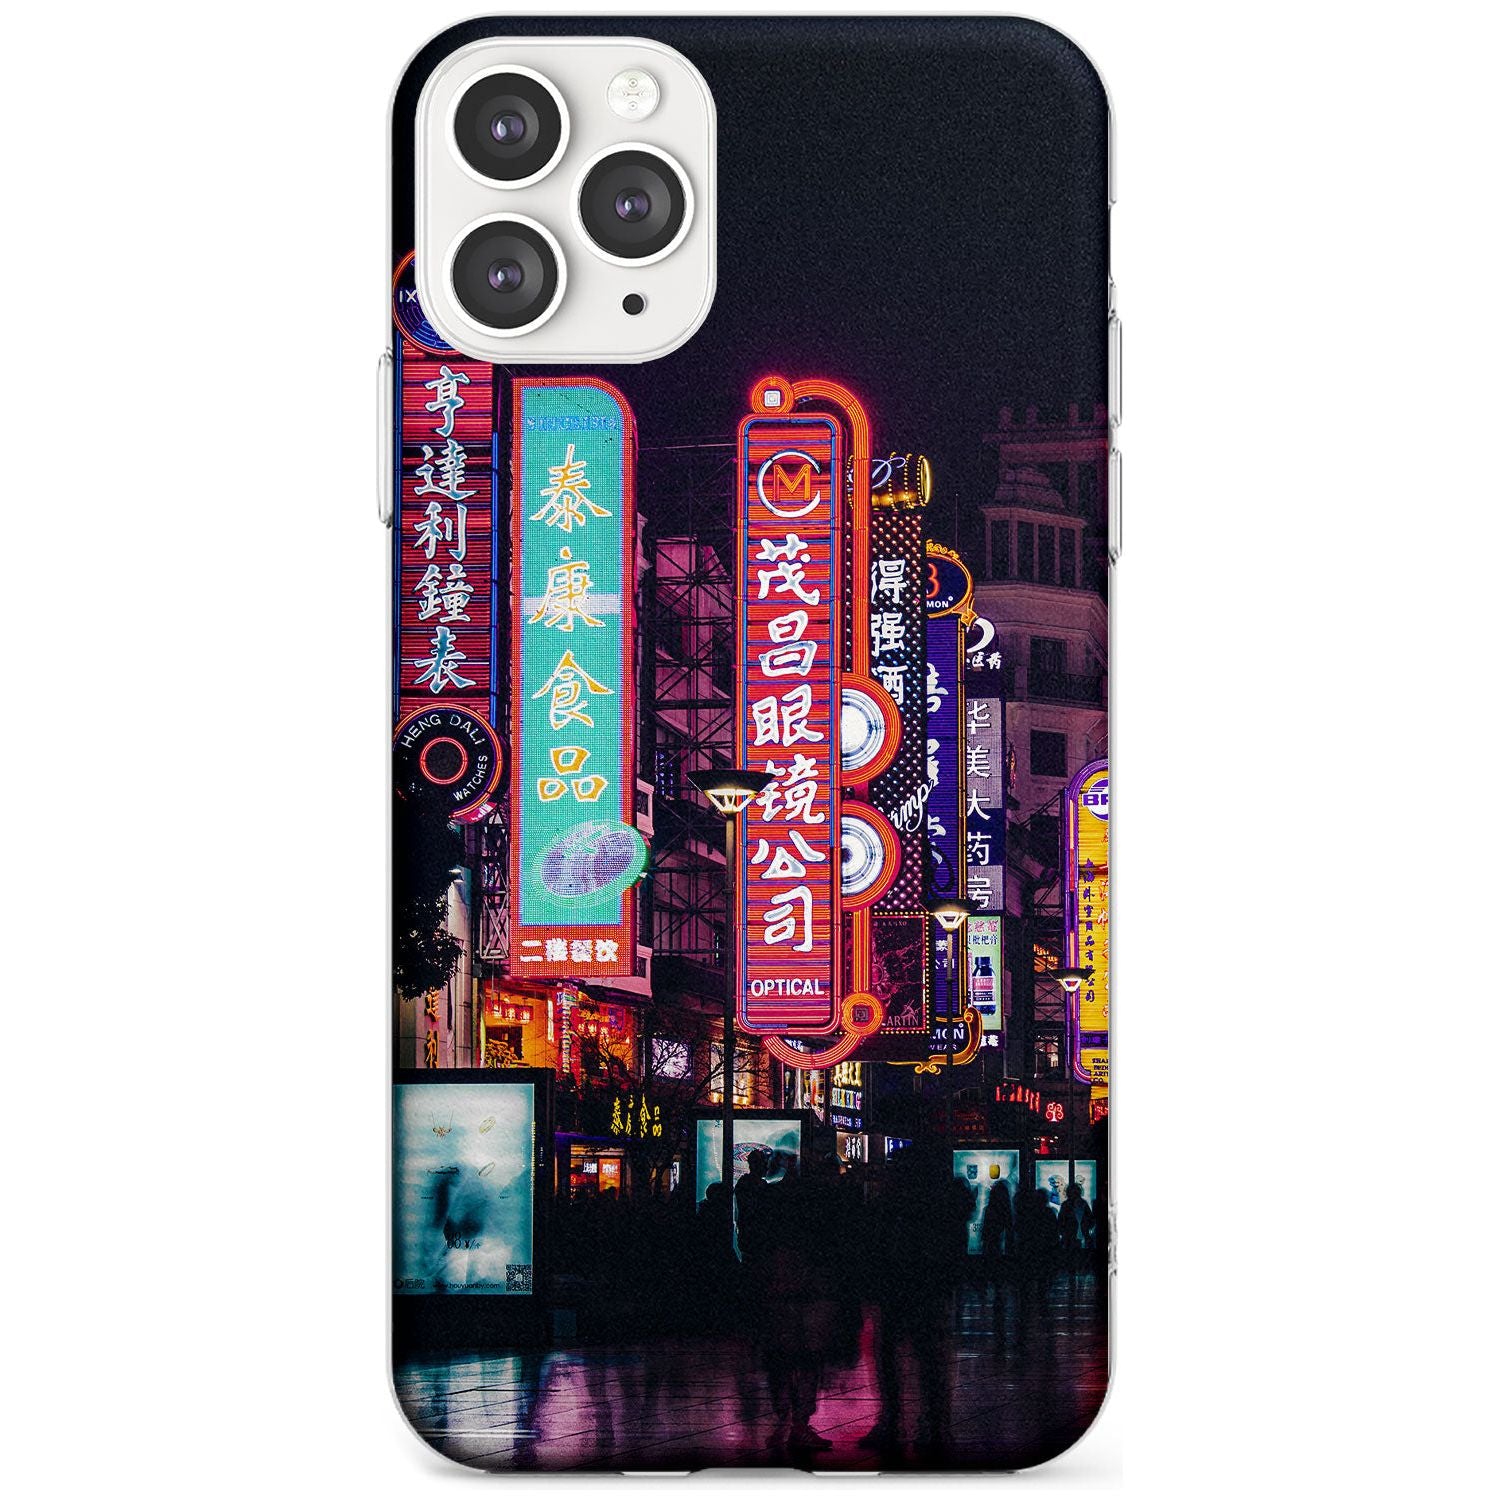 Busy Street - Neon Cities Photographs Slim TPU Phone Case for iPhone 11 Pro Max